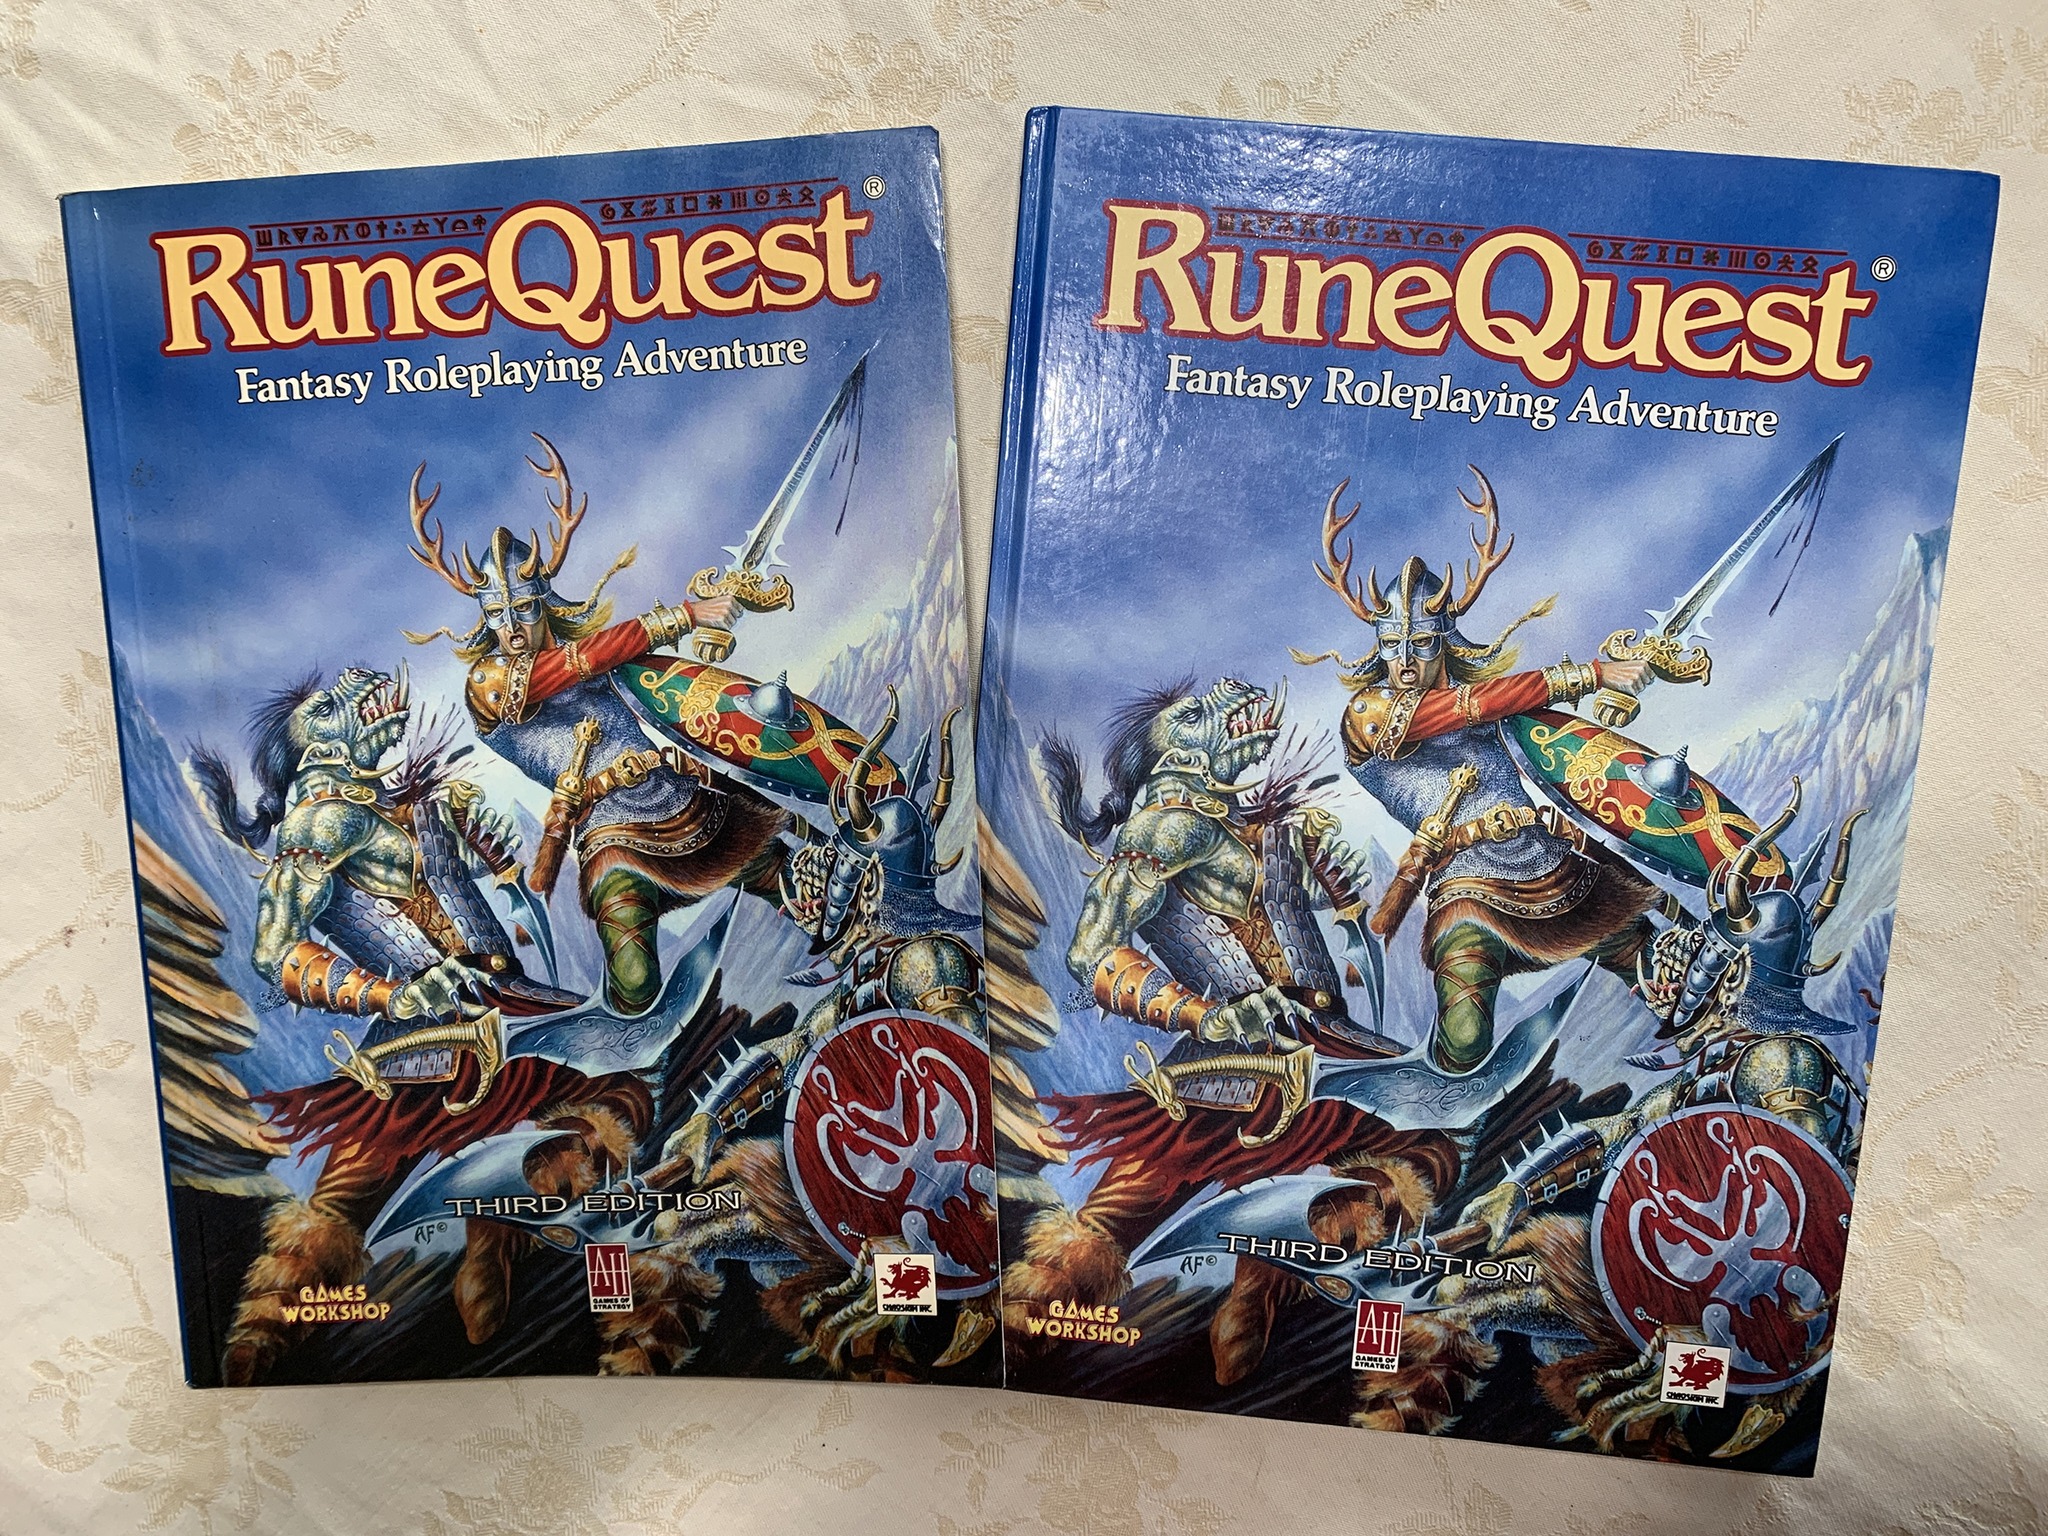 [Chaosium] Games Workshop's RuneQuest was a cracking good read - 'Out of the Suitcase' with Chaosium president Rick Meints